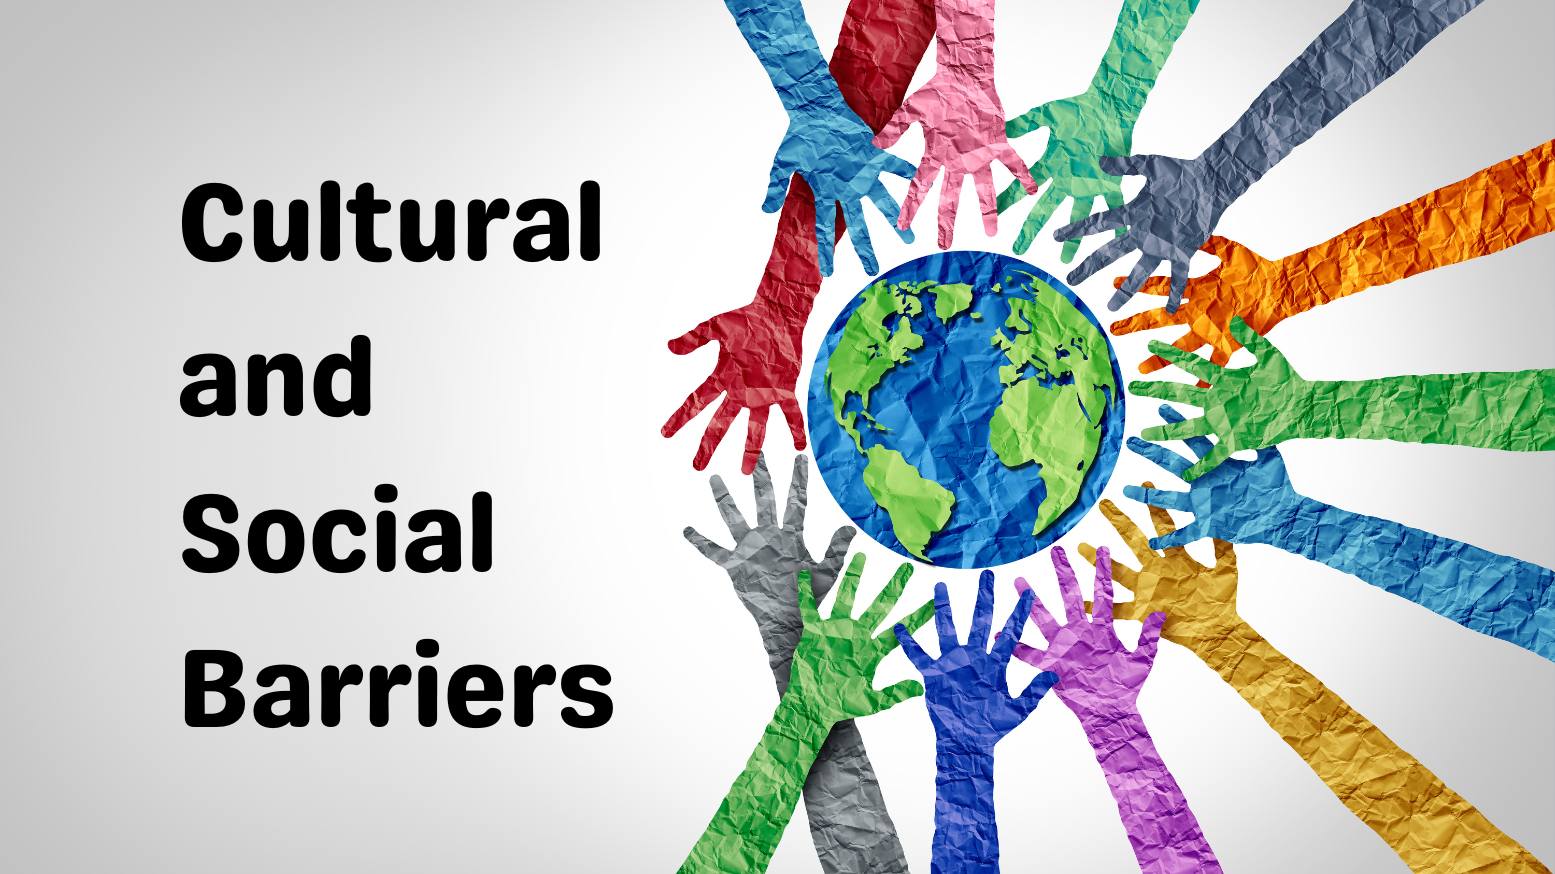 Cultural and Social Barriers